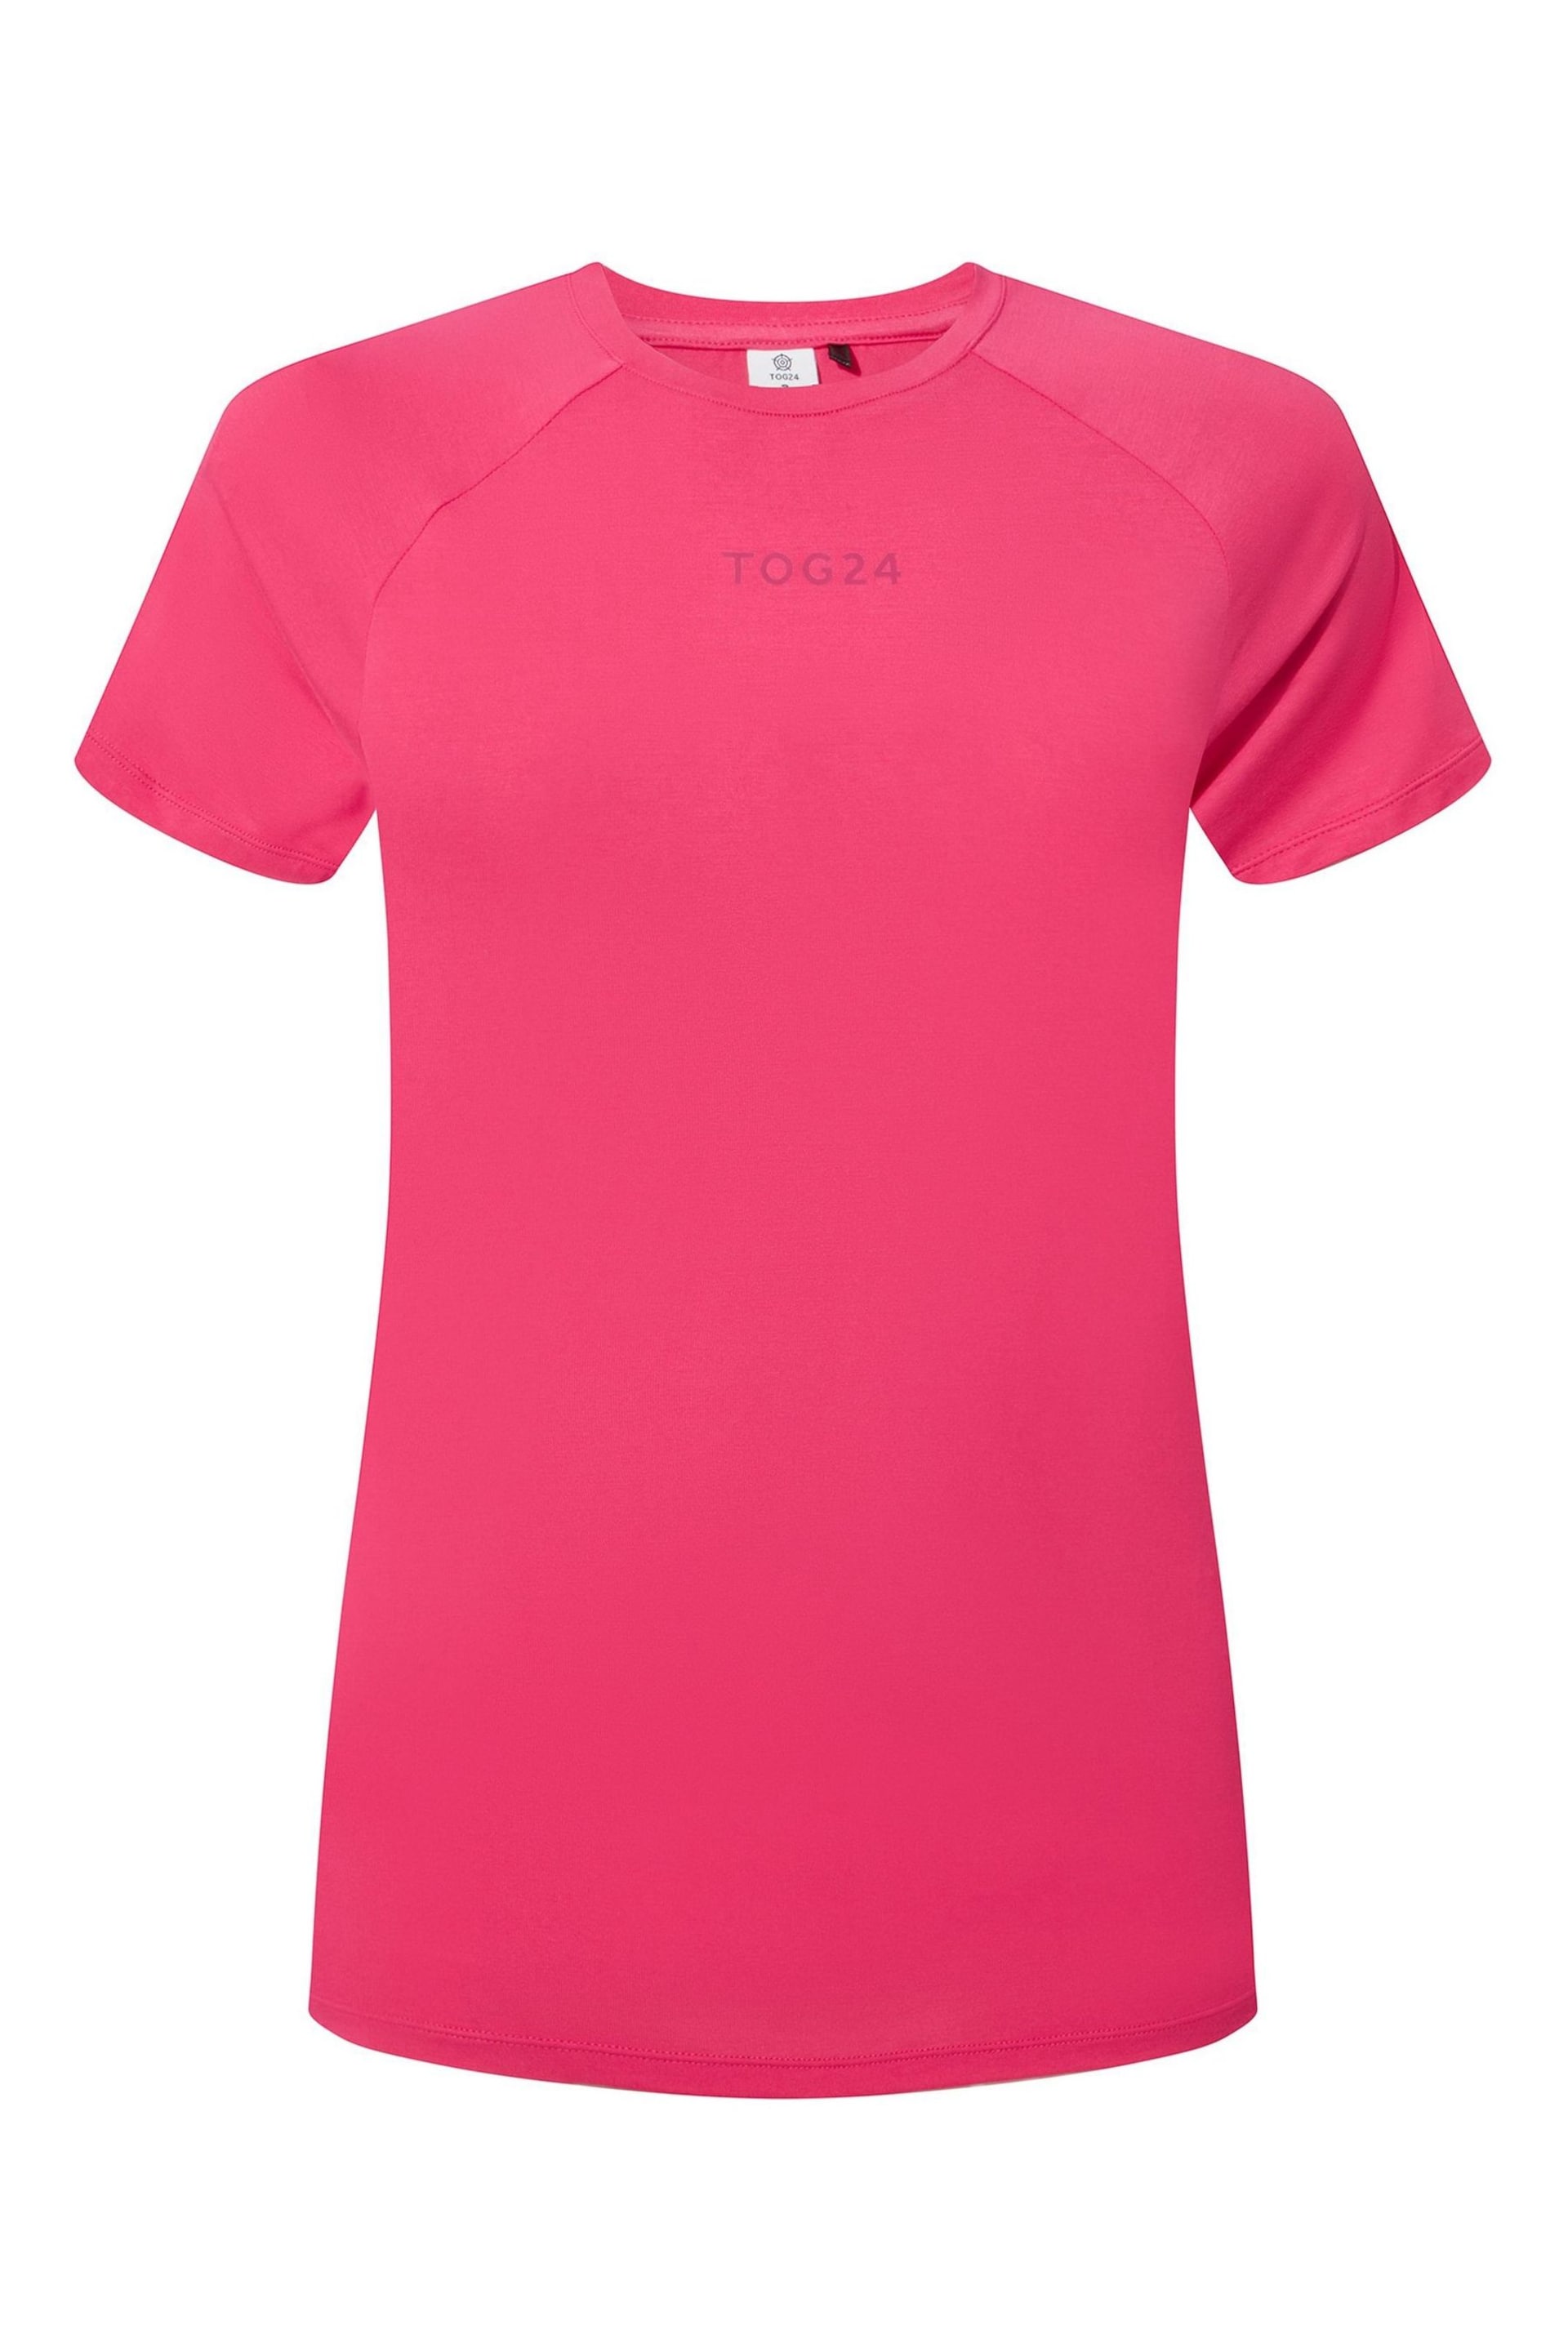 Tog 24 Pink Bethan Sports Top - Image 5 of 5